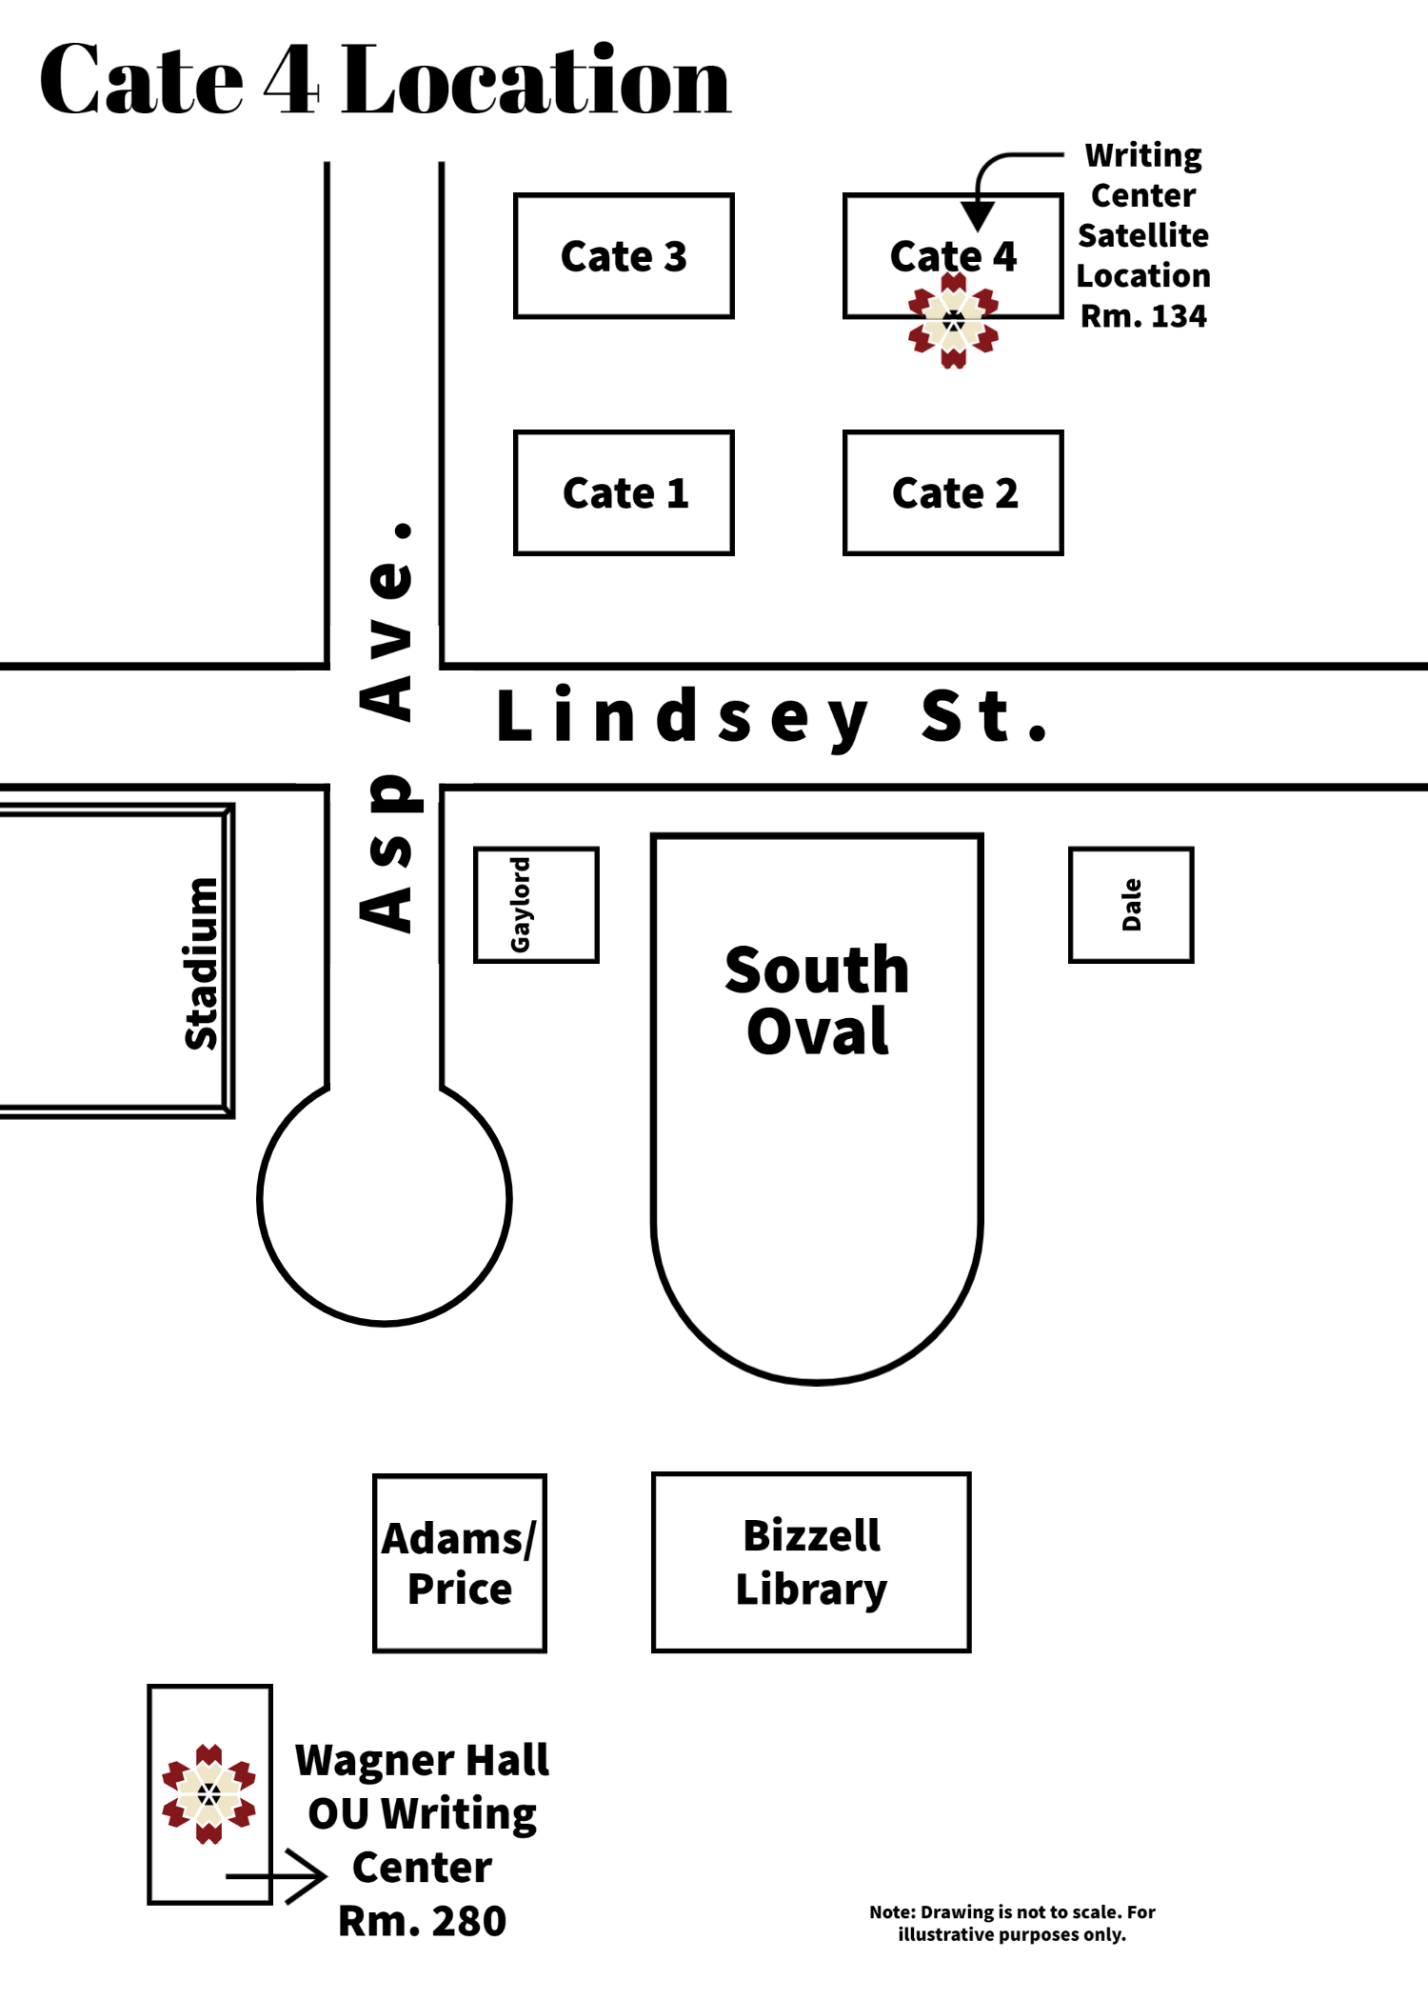 Map showing Wagner Hall location on Asp Ave. with walking path to Cate Center 4 on Lindsey Street. Walking path is via the South Oval.